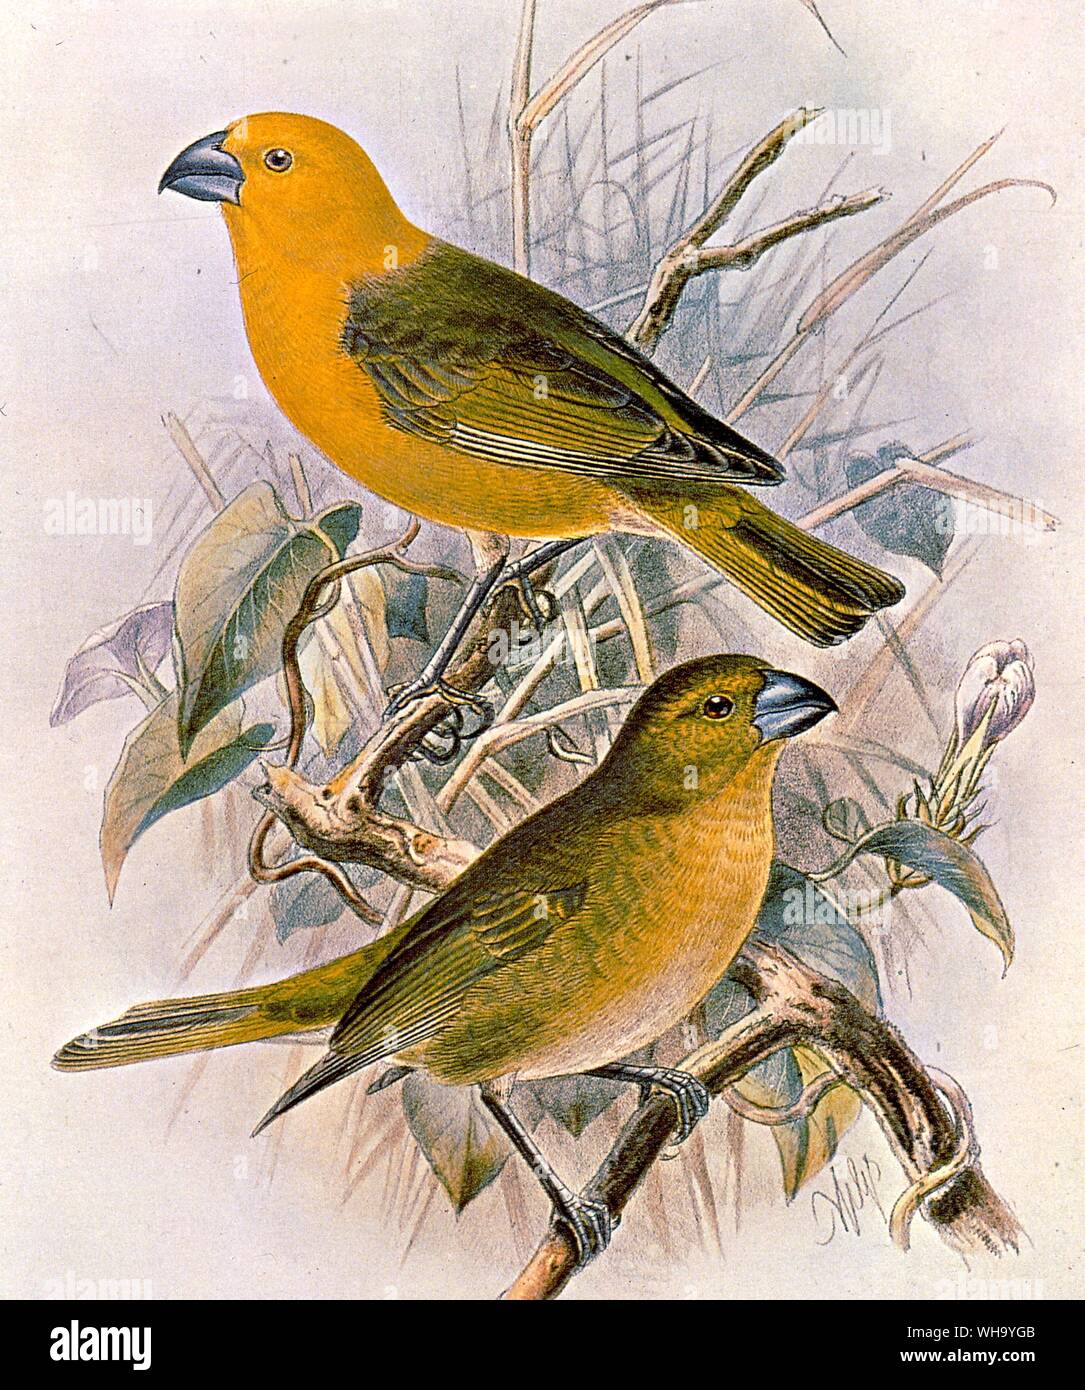 Koa 'Finches' - Hand-coloured lithograph by J. G. Keulmans from W. Rothschild's Avifauna of Laysan and the Neighbouring Islands (London, 1893-1900), Pl.68. Courtesy of The Hon. Miriam Rothschild - Length of bird 32cm (13in) Stock Photo